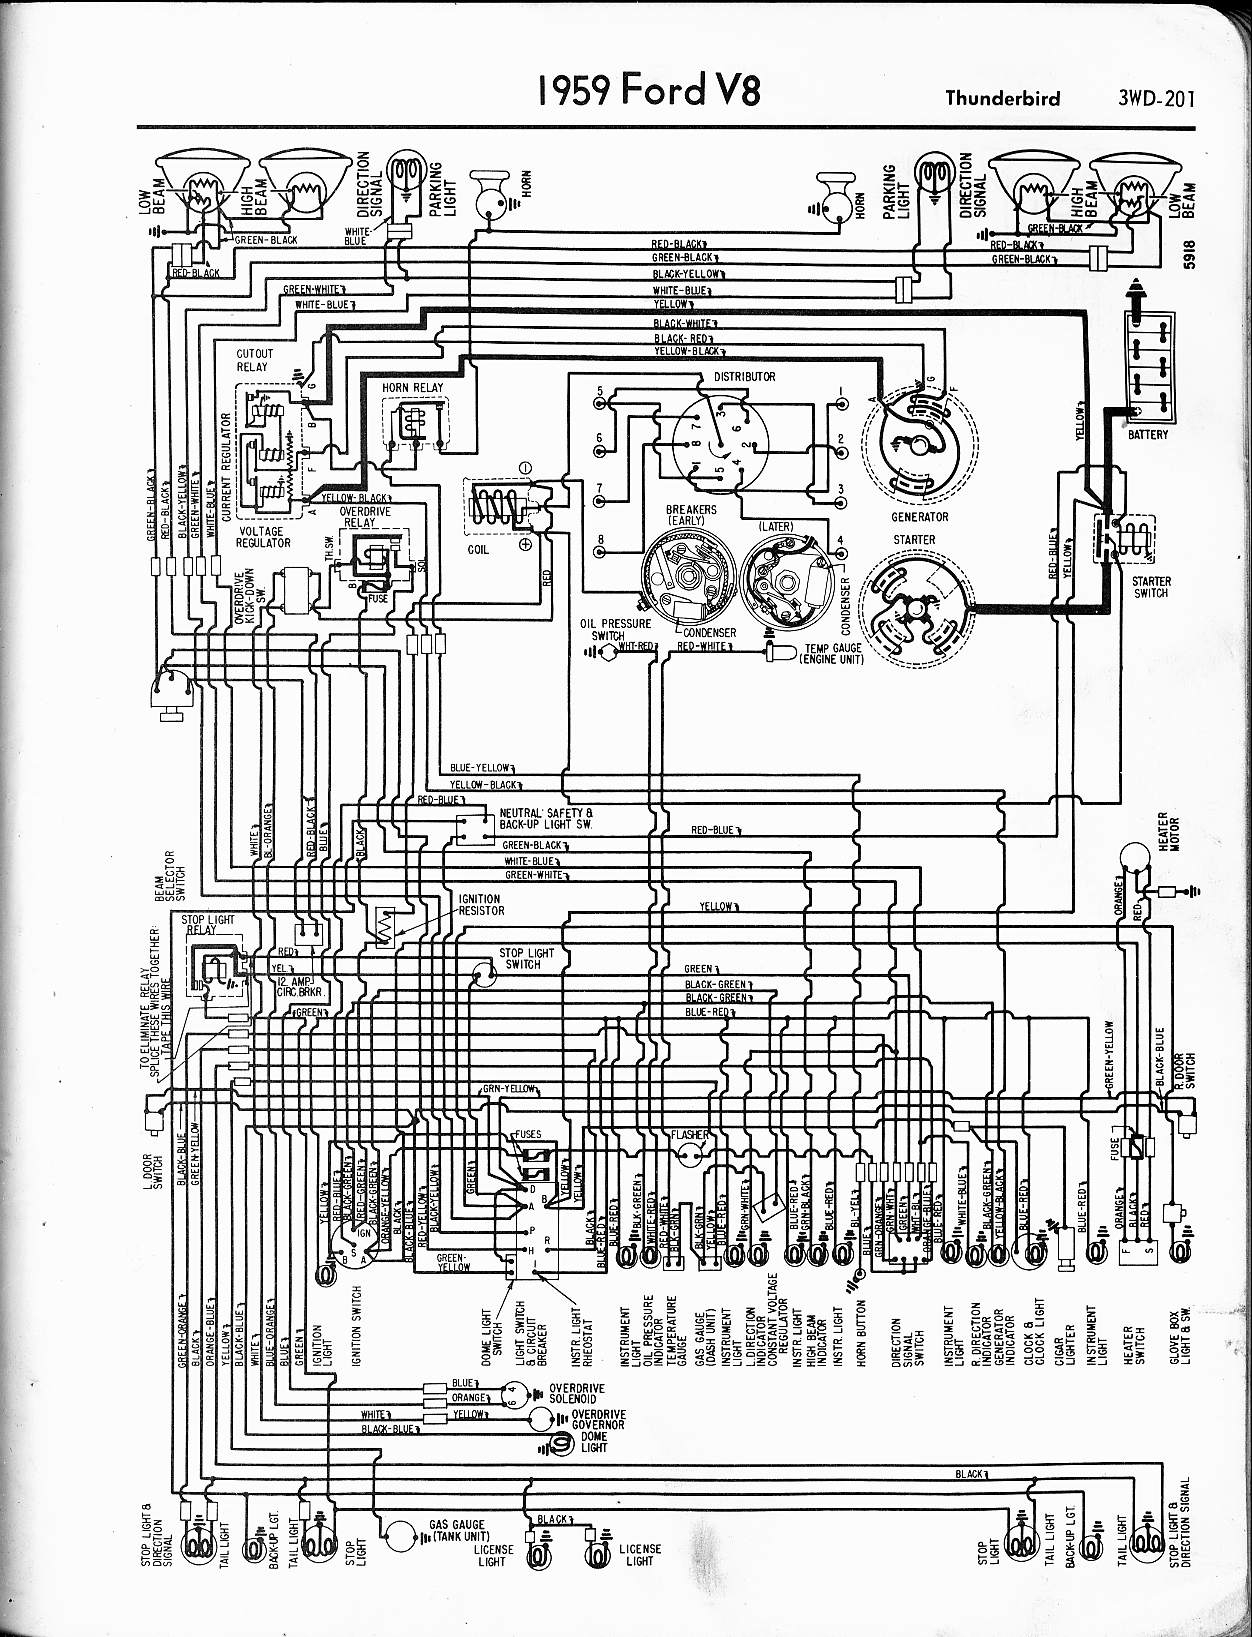 Da4 Ford 600 Tractor Wiring Diagram | Wiring Resources